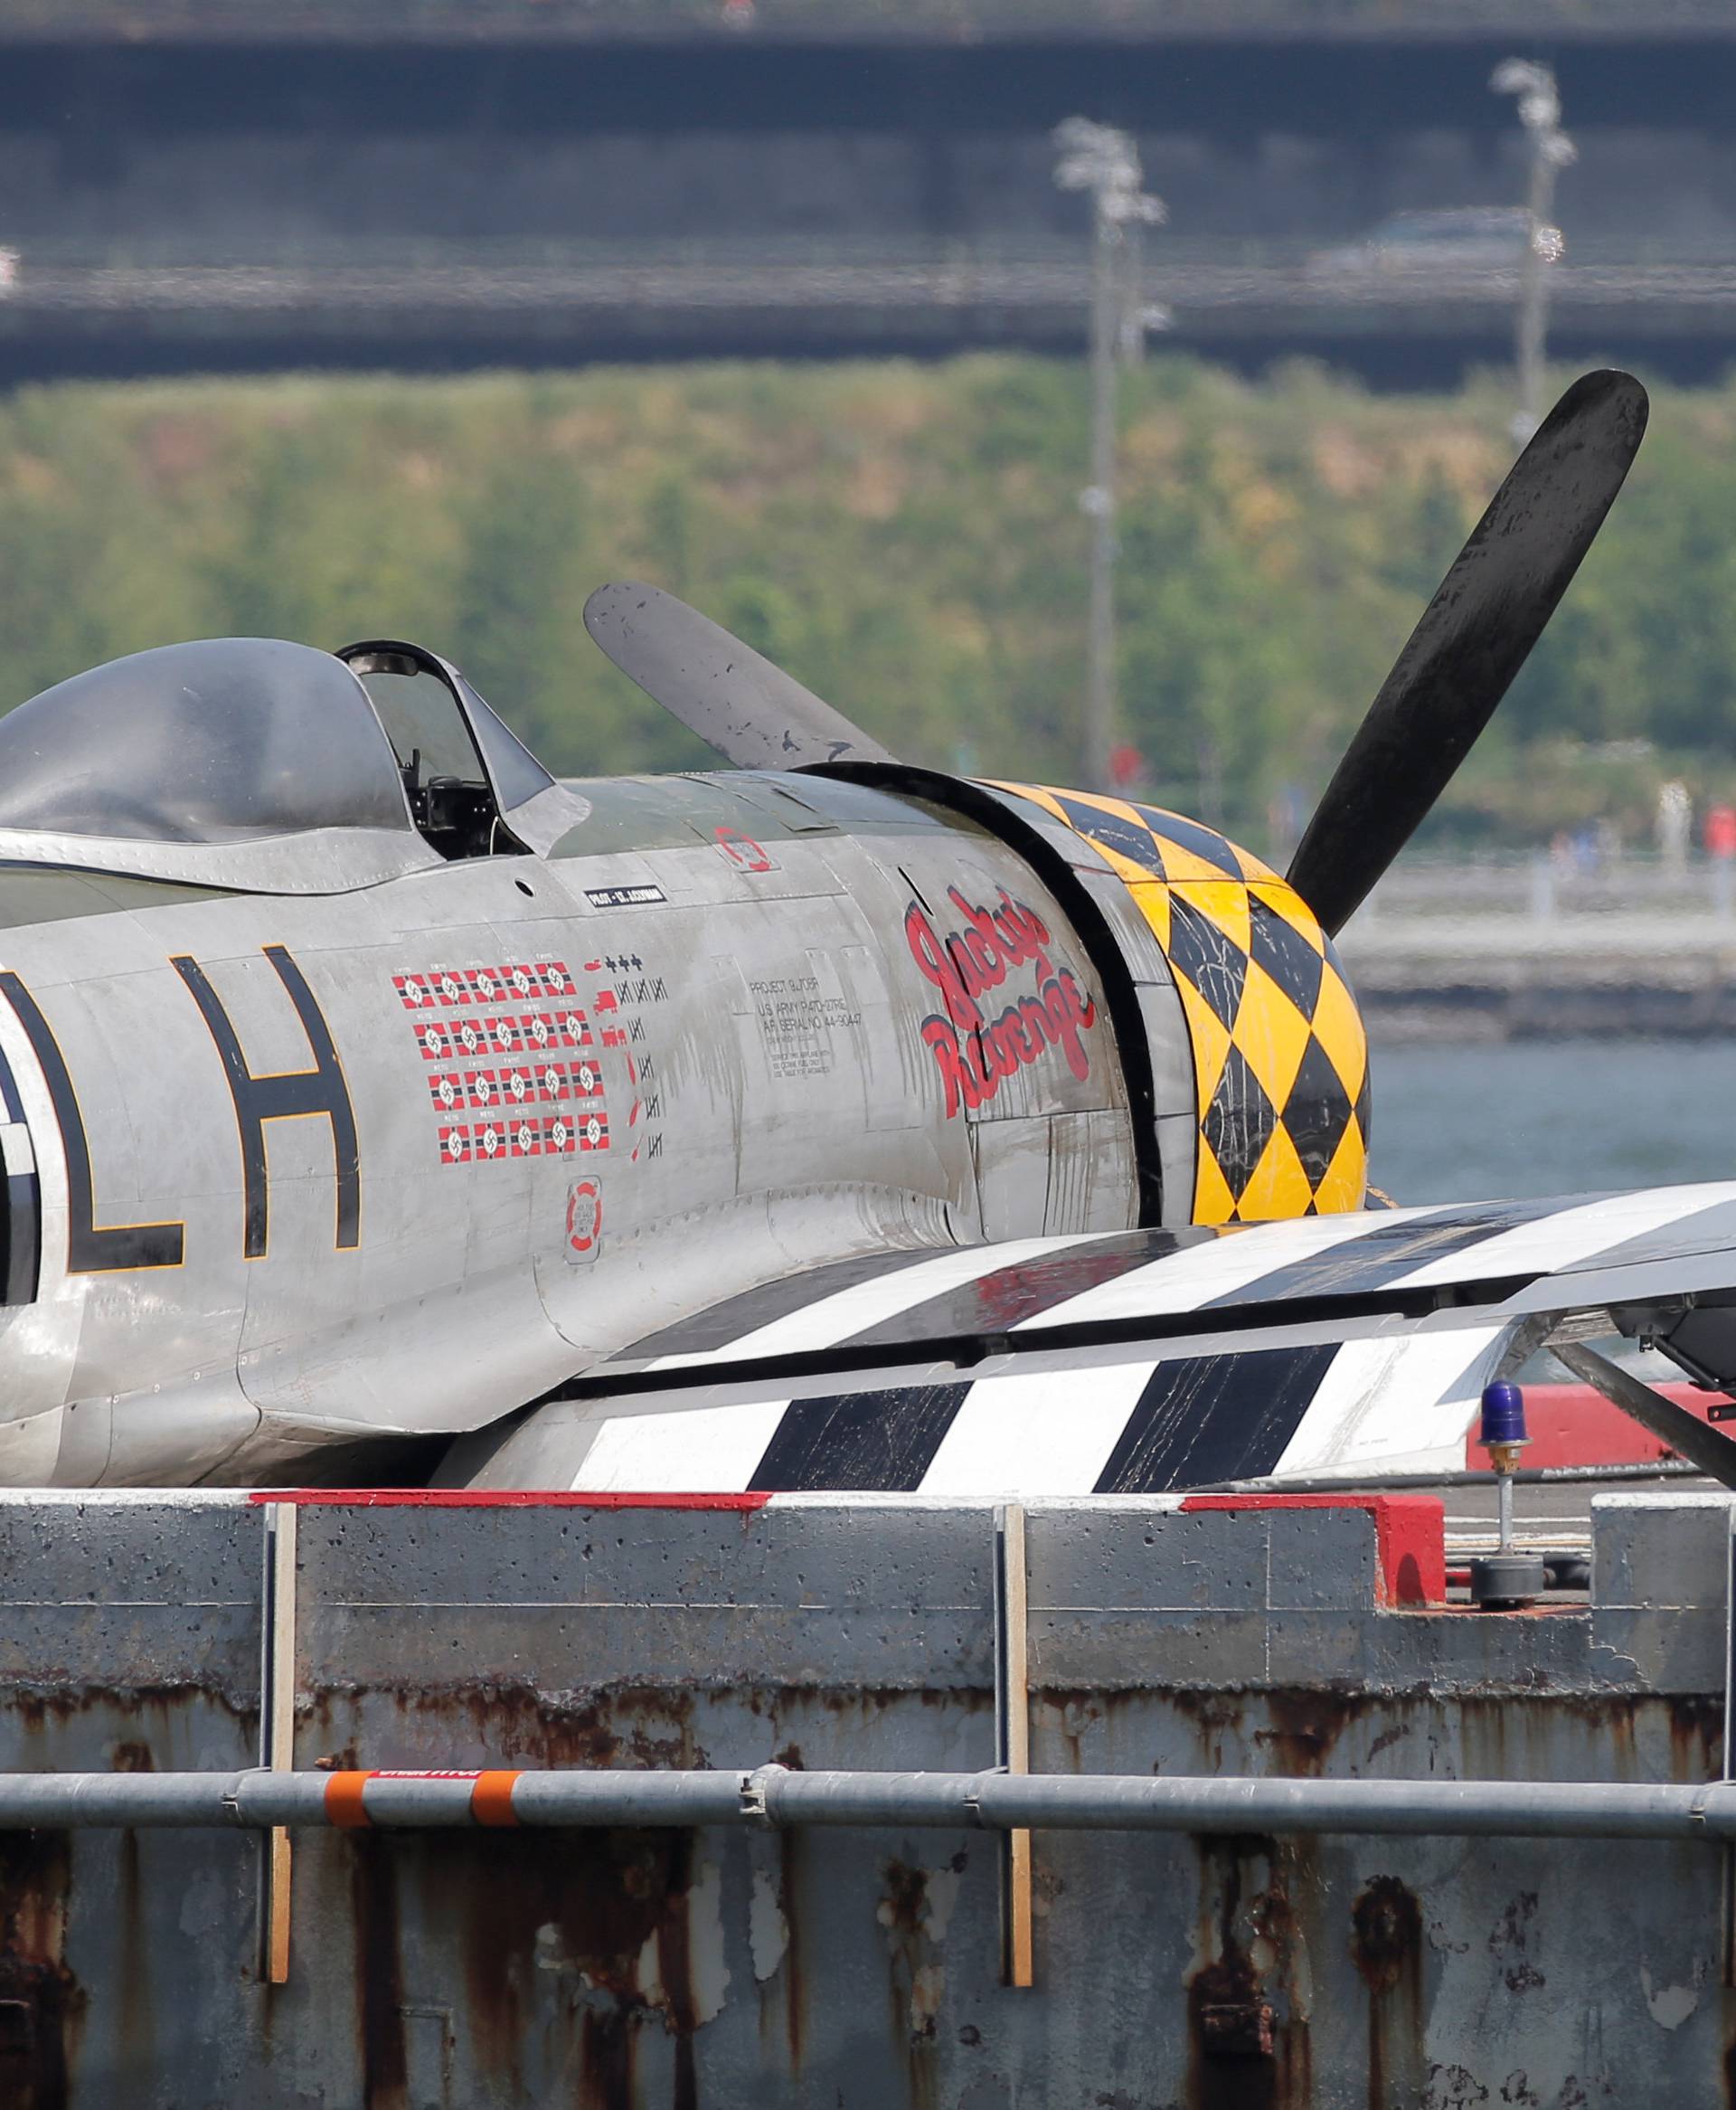 A worker photographs the wreckage of a vintage P-47 Thunderbolt airplane that crashed in the Hudson River in New York